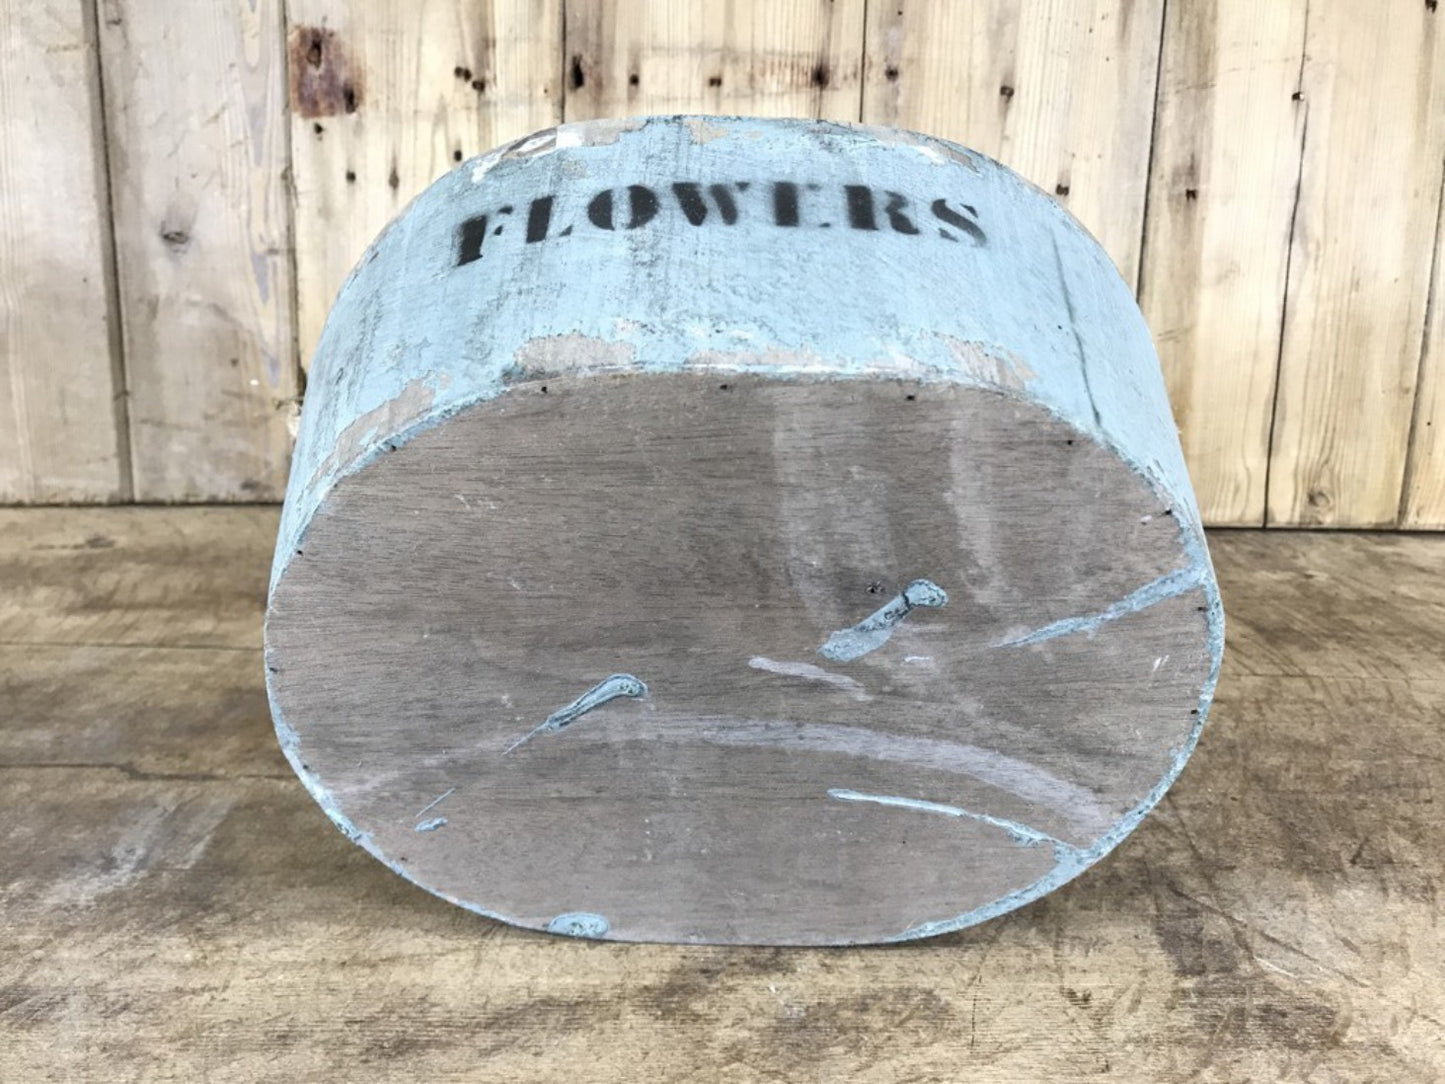 Painted Rustic Wooden Planter Bucket With Rope Handle